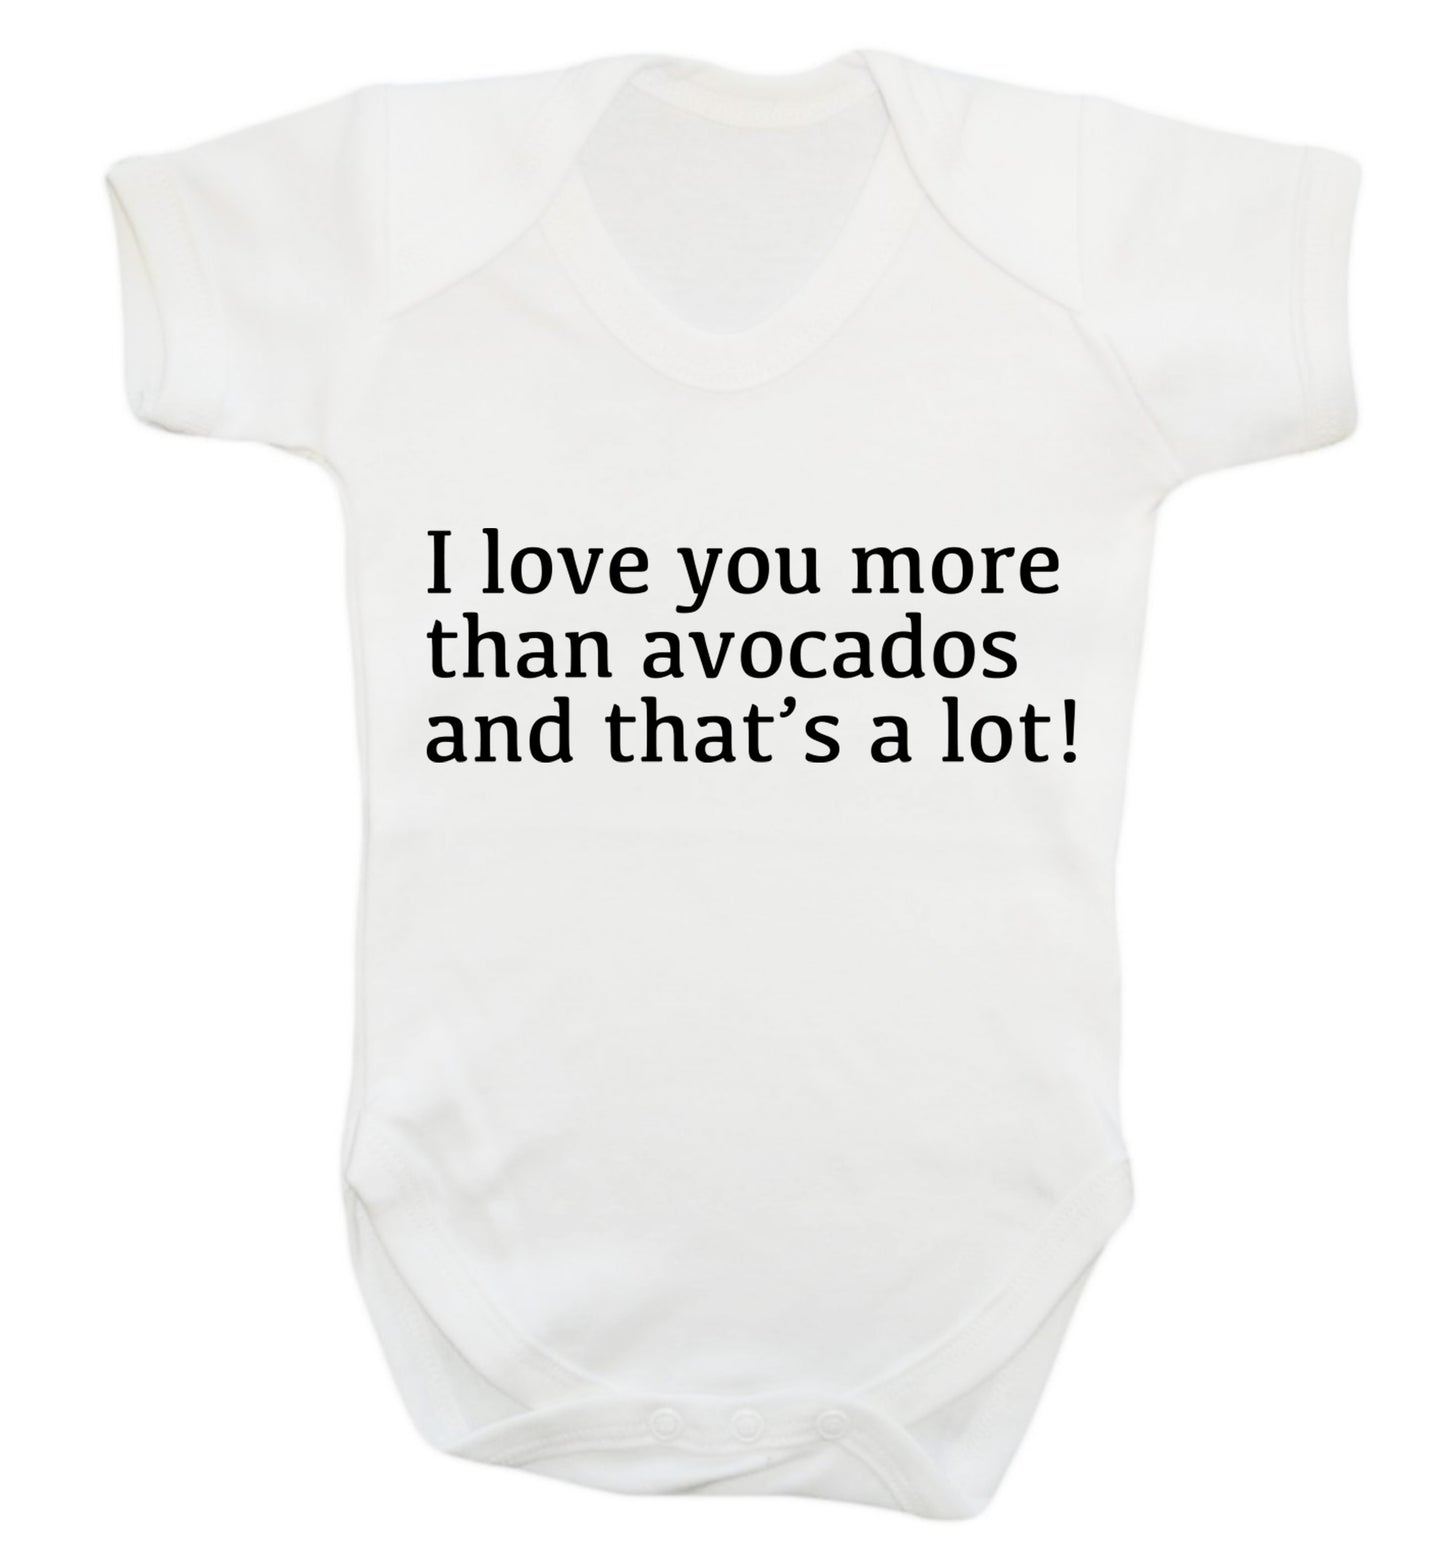 I love you more than avocados and that's a lot Baby Vest white 18-24 months